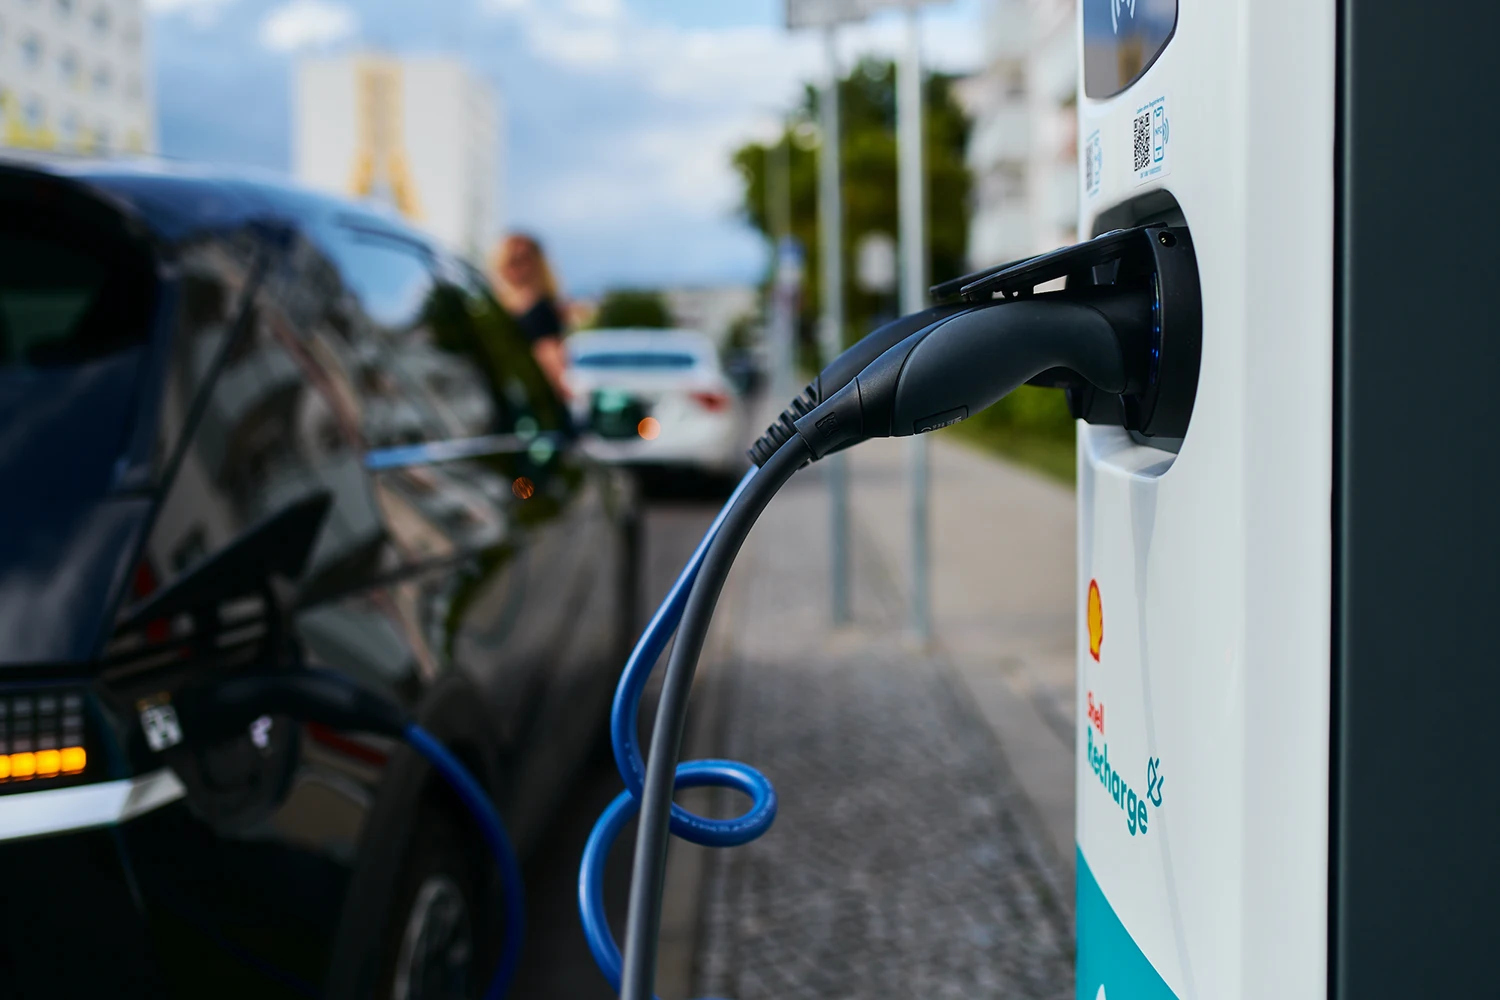 Shell ubitricity to install and operate 294 new public Shell Recharge charge points near Paris